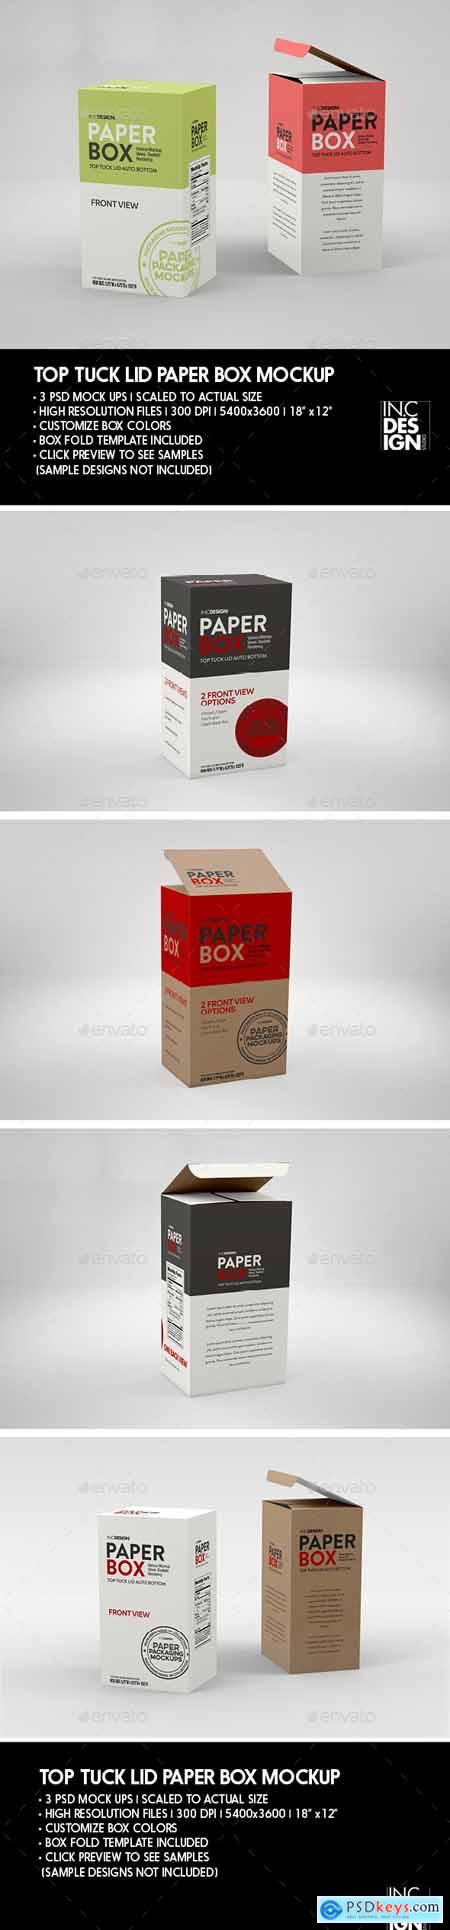 Download Graphicriver Paper Top Lid Tuck Box Packaging Mockup 27036434